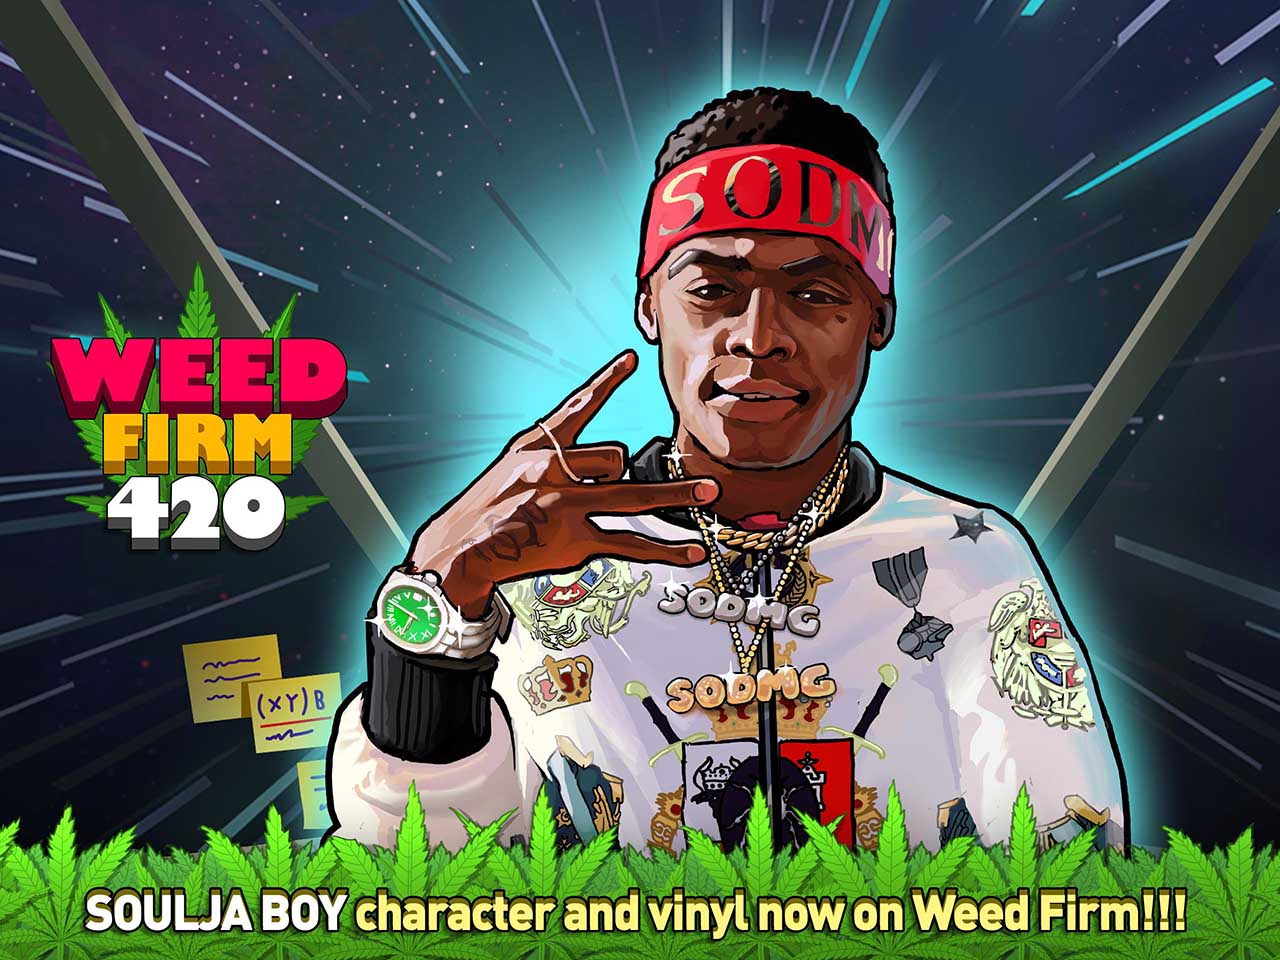 Weed Pay Firm 2 Bud Farm Giant Screen 1